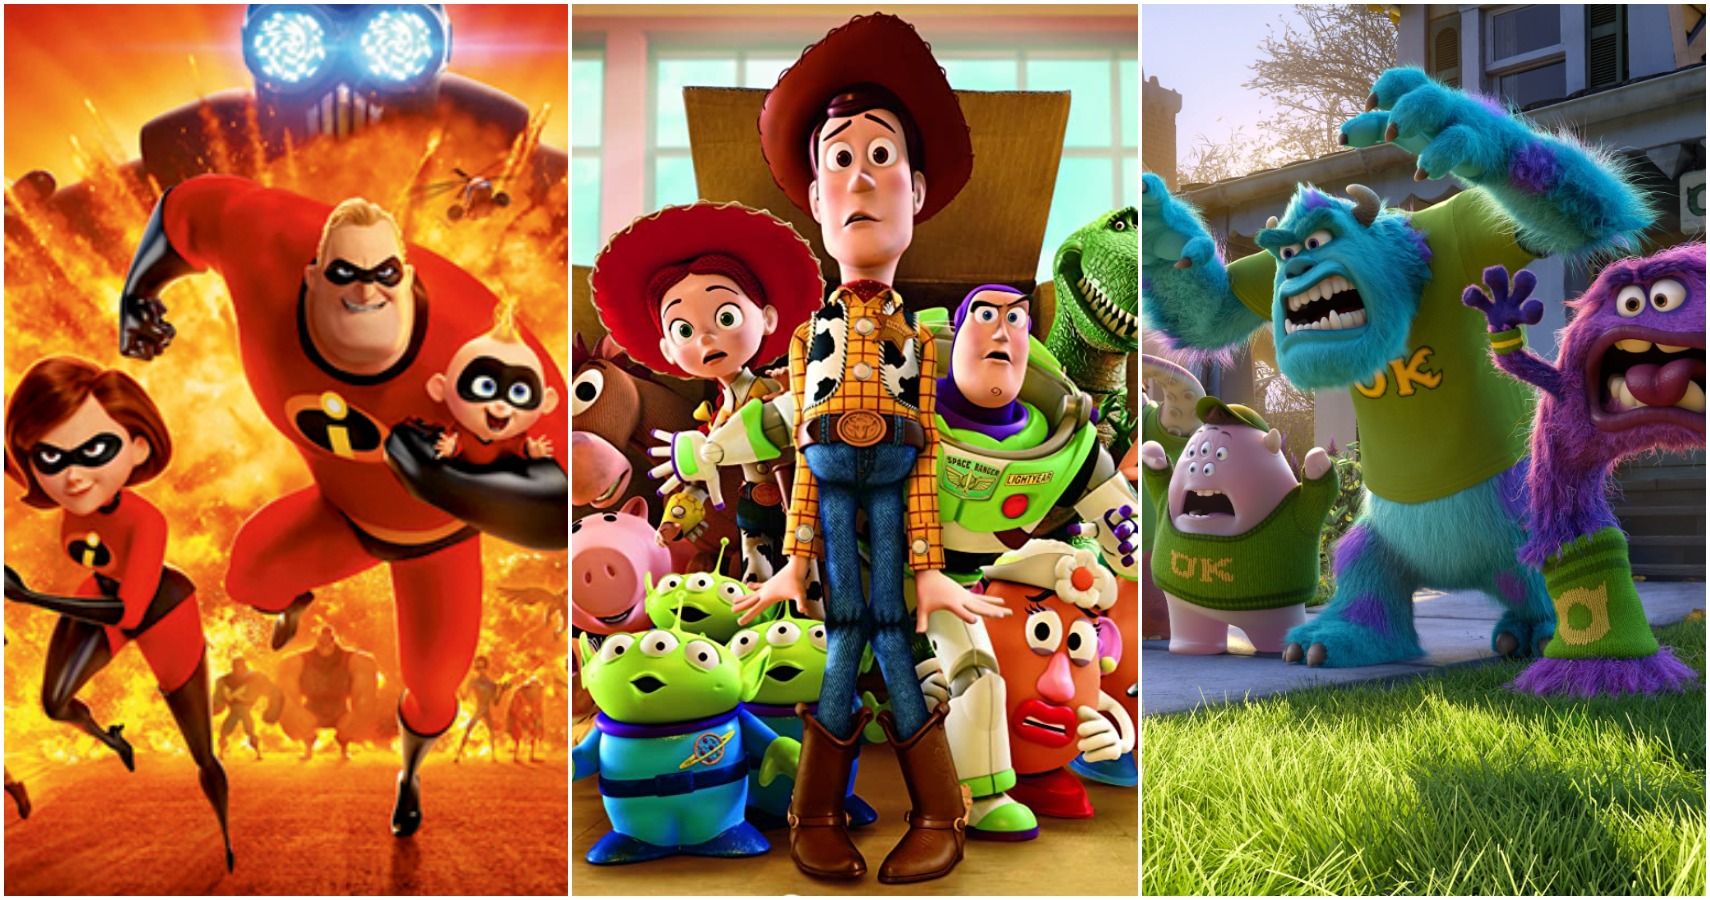 Every Pixar Movie From The 2010s (Ranked By Metacritic)